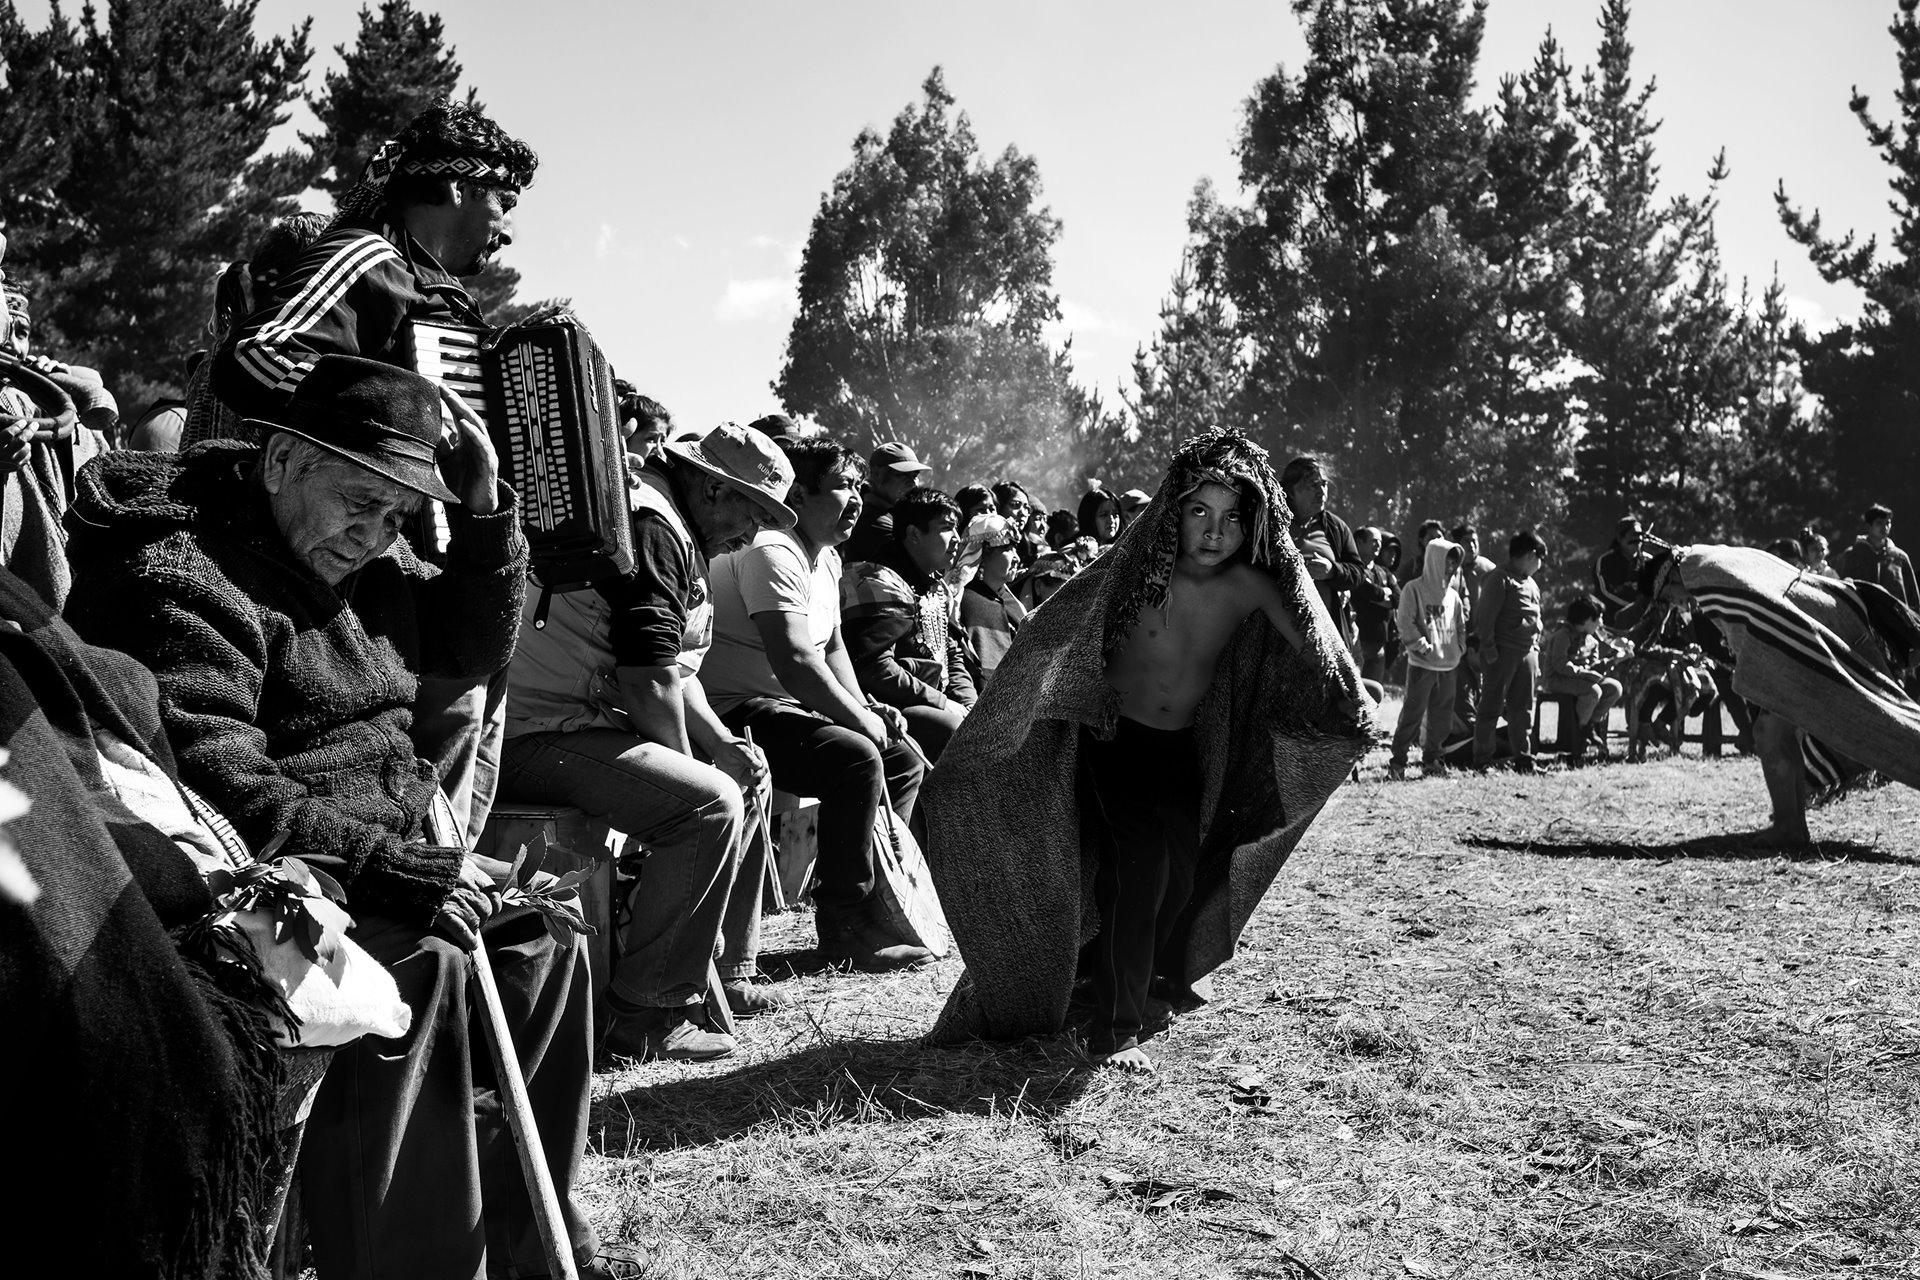 A child from the Coñomil Epuleo Community, in Ercilla, Chile, dances choike purrún, an ancestral dance imitating the movements of a bird, during the celebration of Ngillatun &ndash; a form of communal prayer and thanksgiving that is one of the most important ceremonies in Mapuche culture.